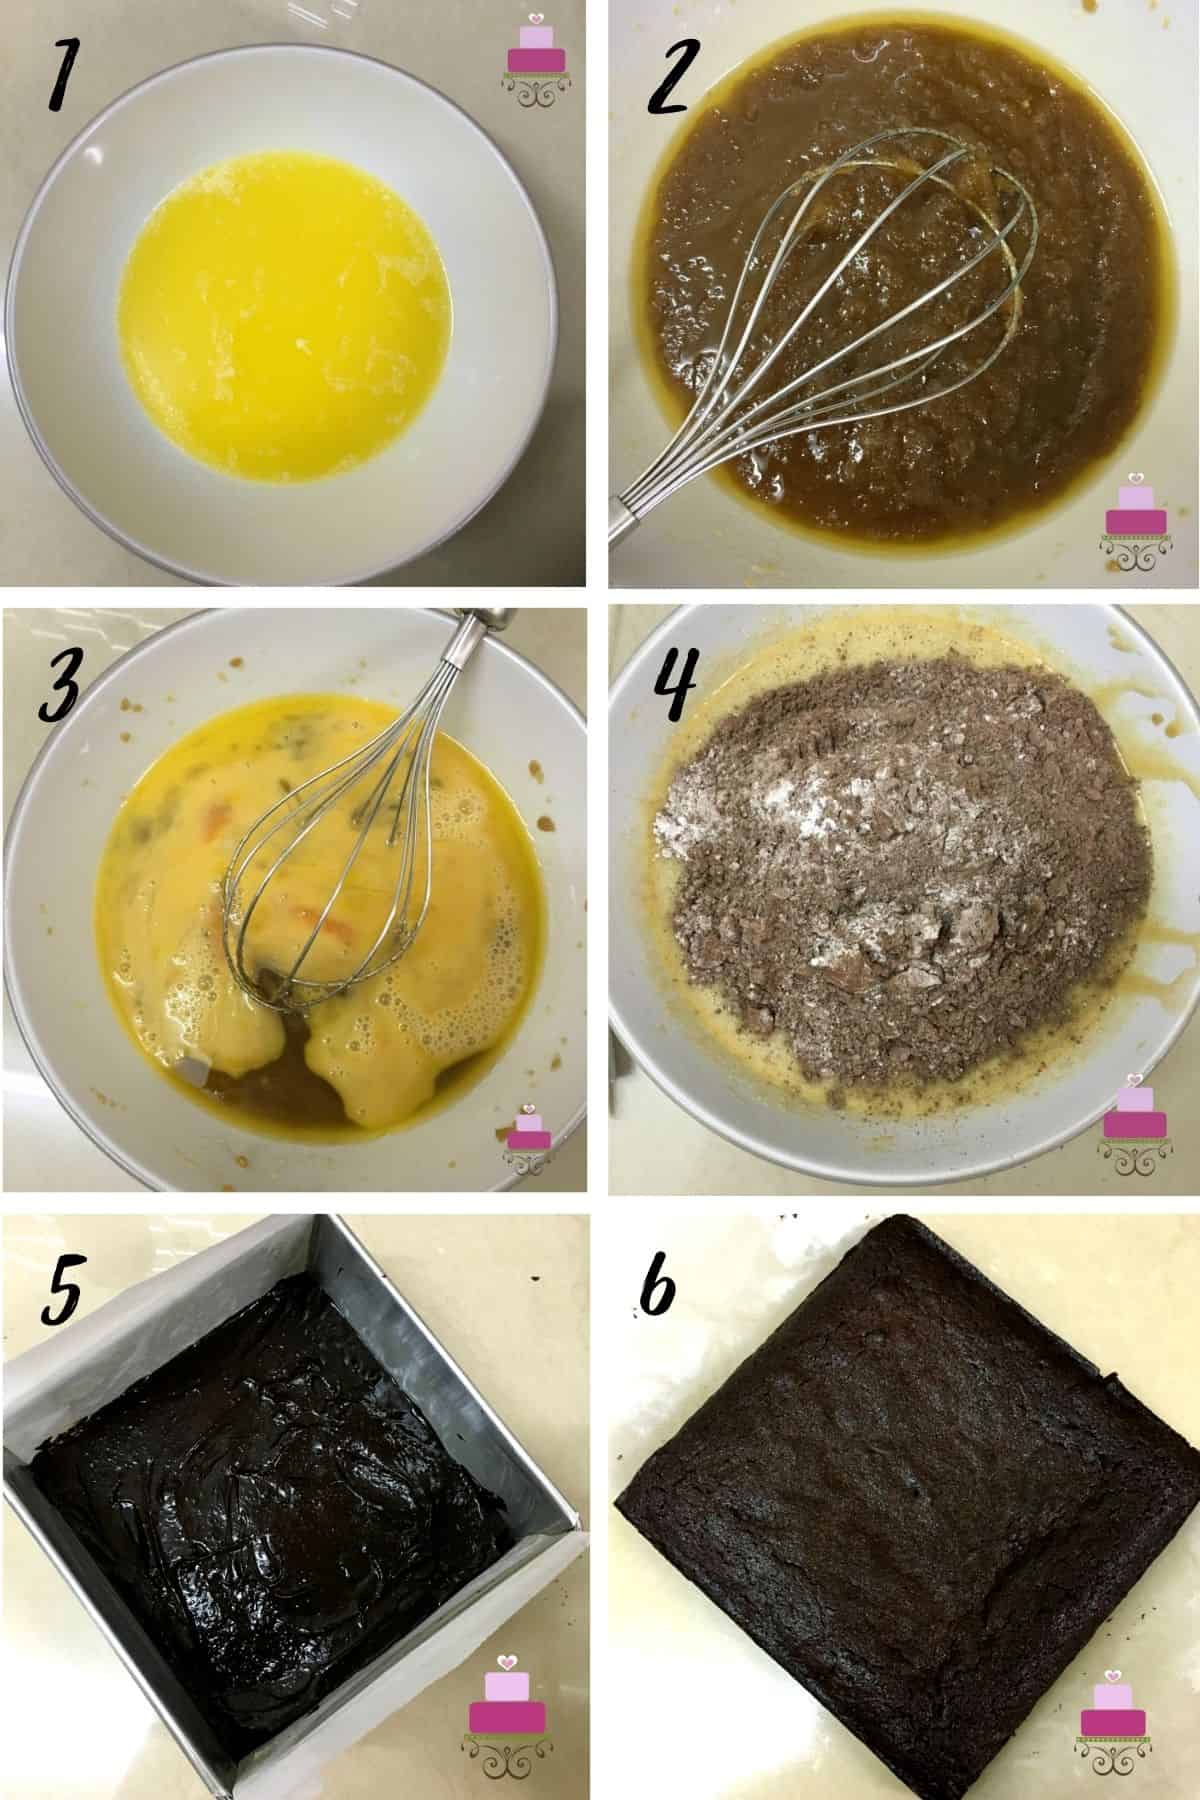 A poster of 6 images showing how to make chocolate brownies.